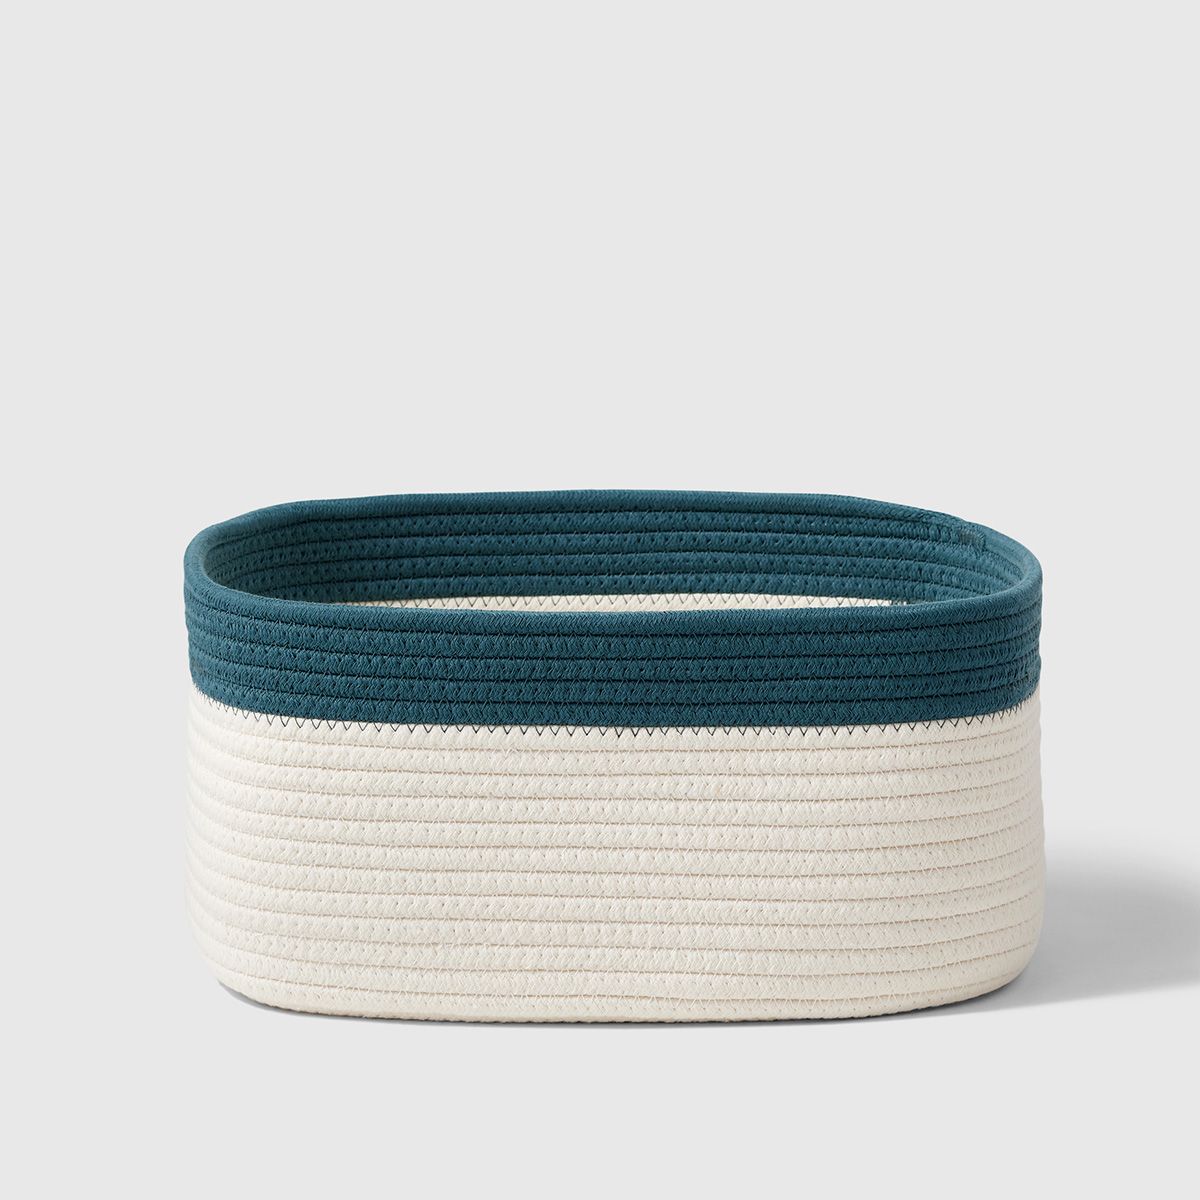 Marie Kondo Small Kawaii Cotton Rope Bin Teal Blue | The Container Store